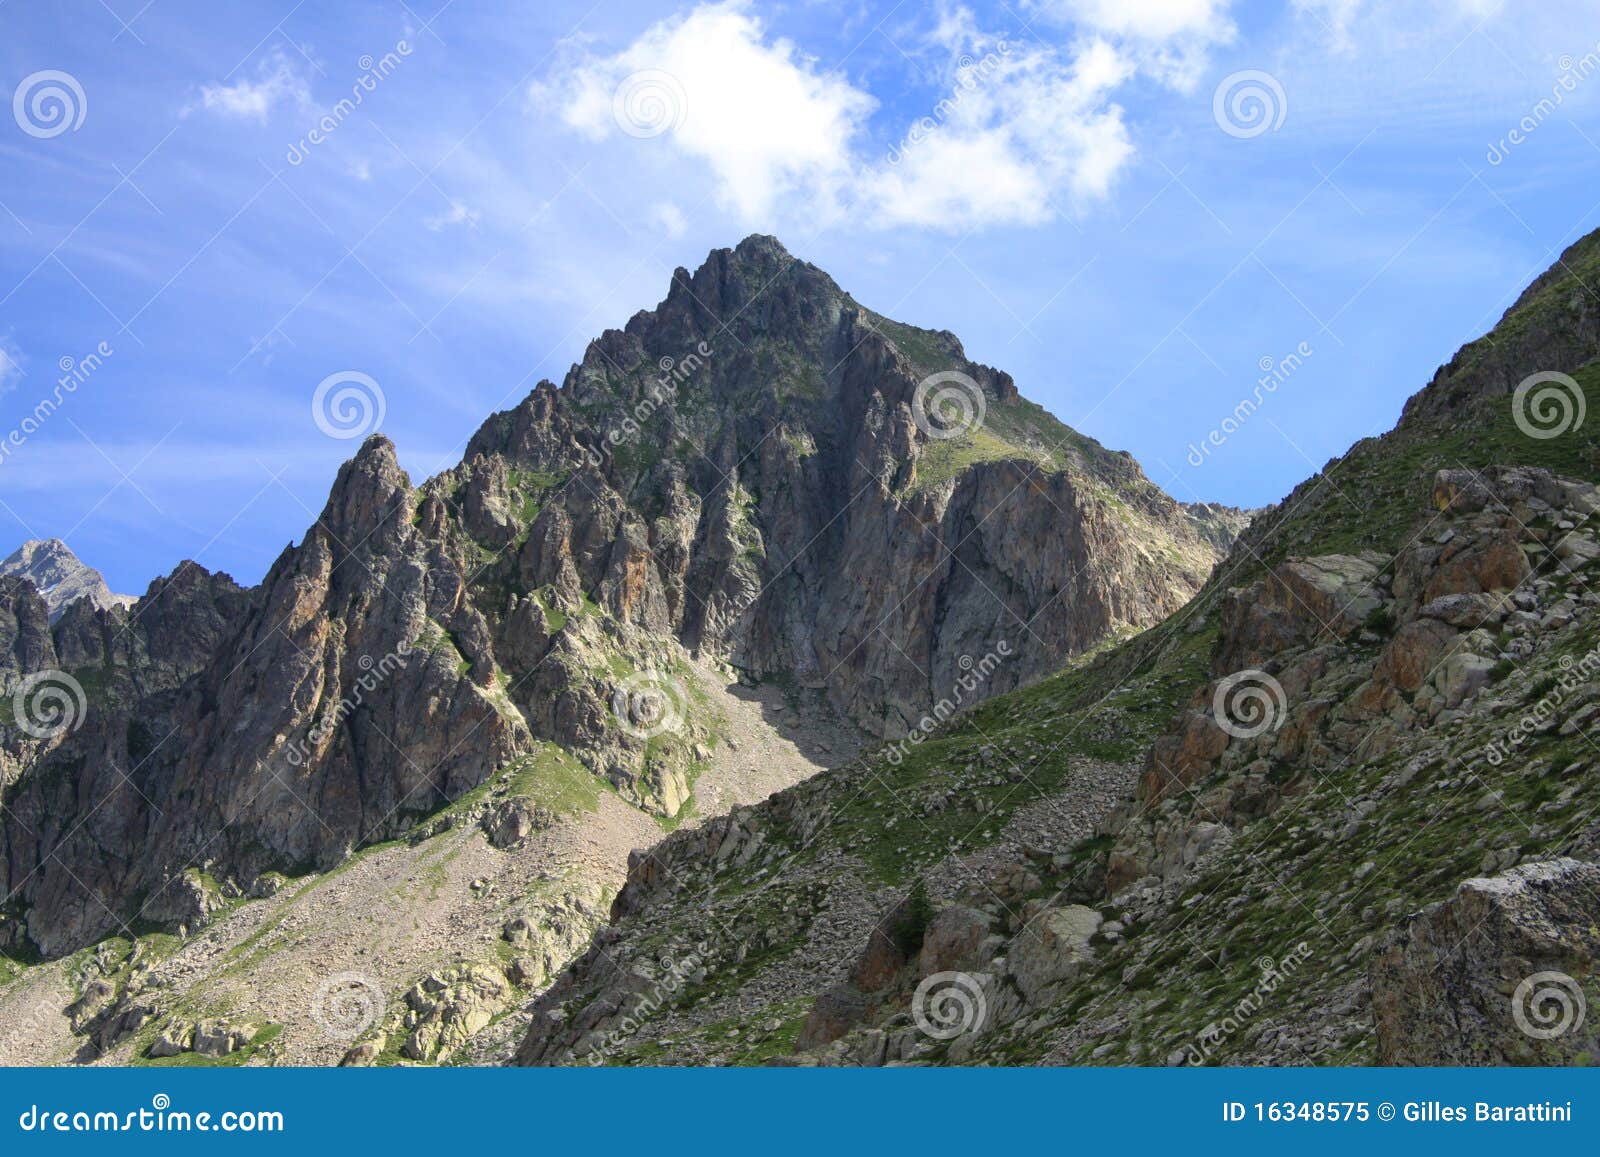 Site of Prals, France stock image. Image of height, collar - 16348575